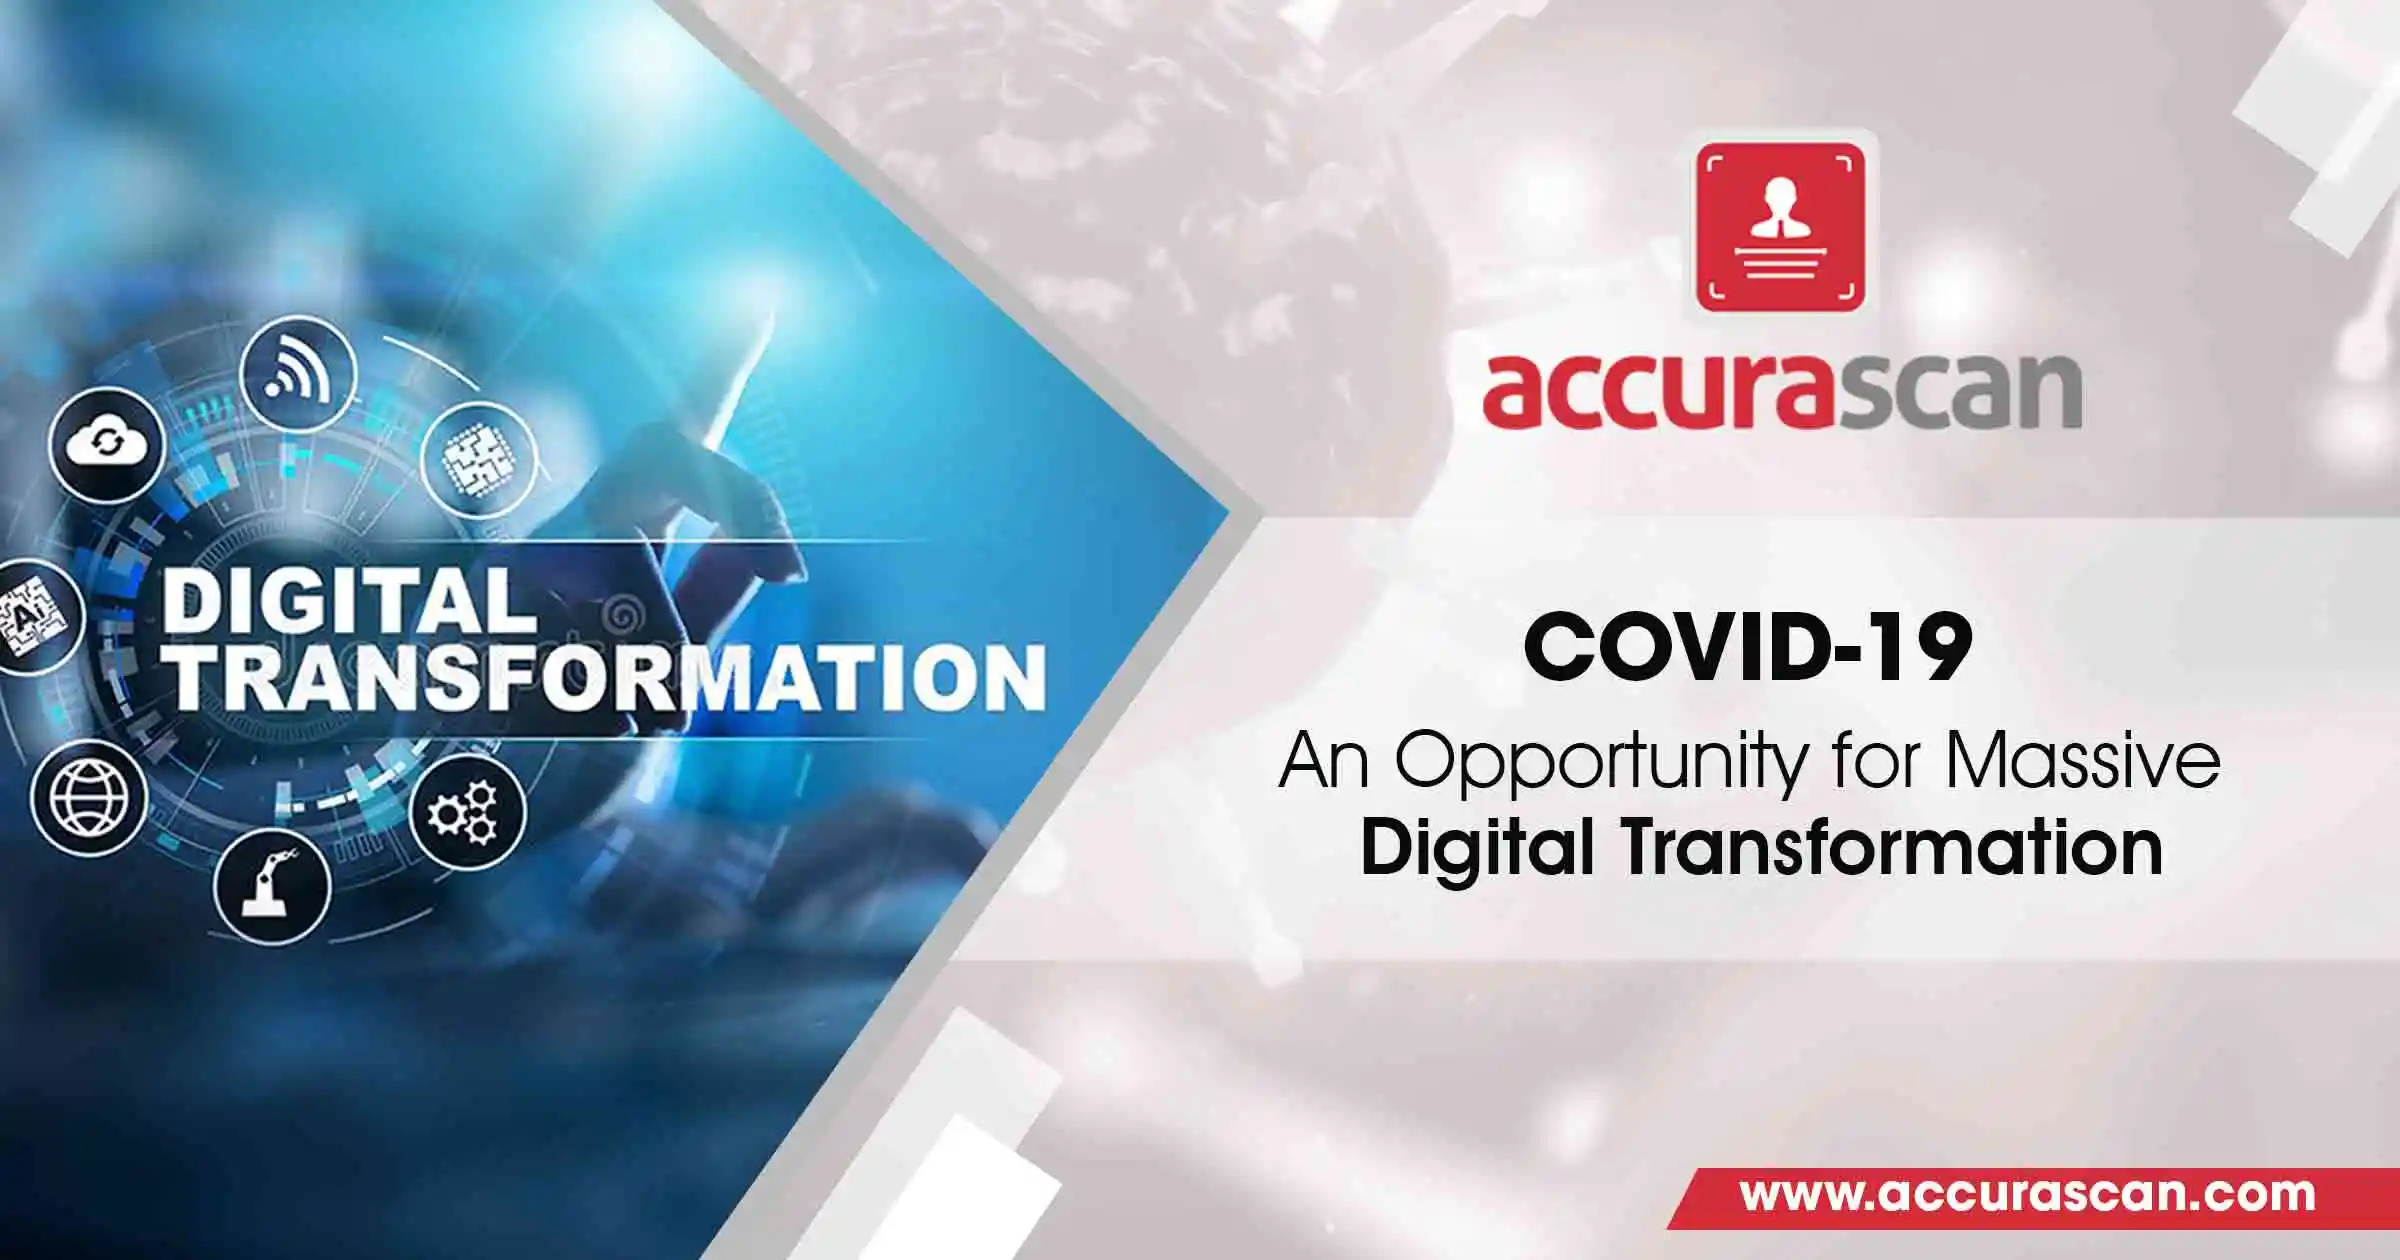 COVID-19: An Opportunity for Massive Digital Transformation